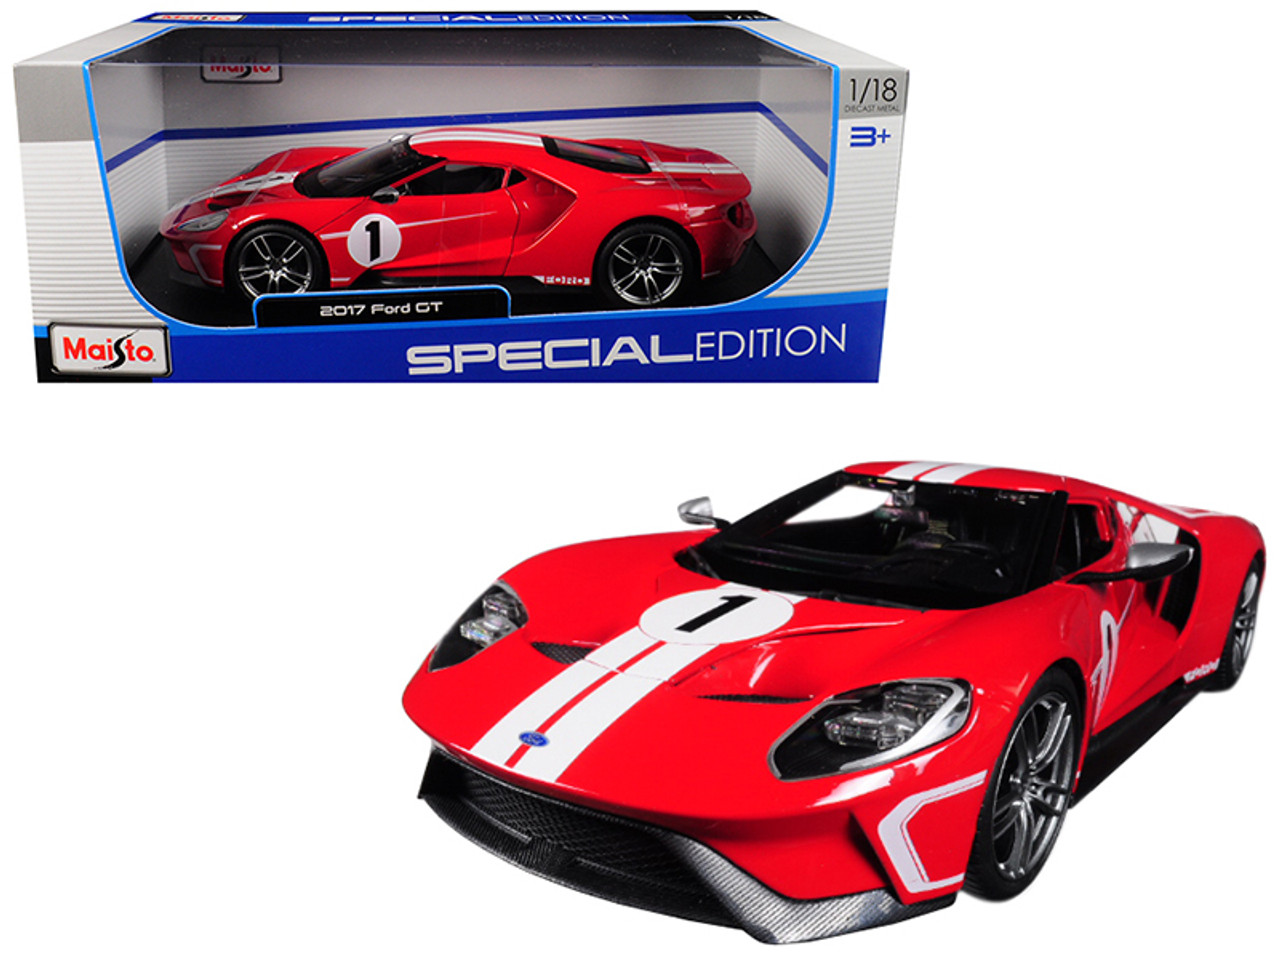 2017 Ford GT #1 Red Heritage Special Edition 1/18 Diecast Model Car by Maisto